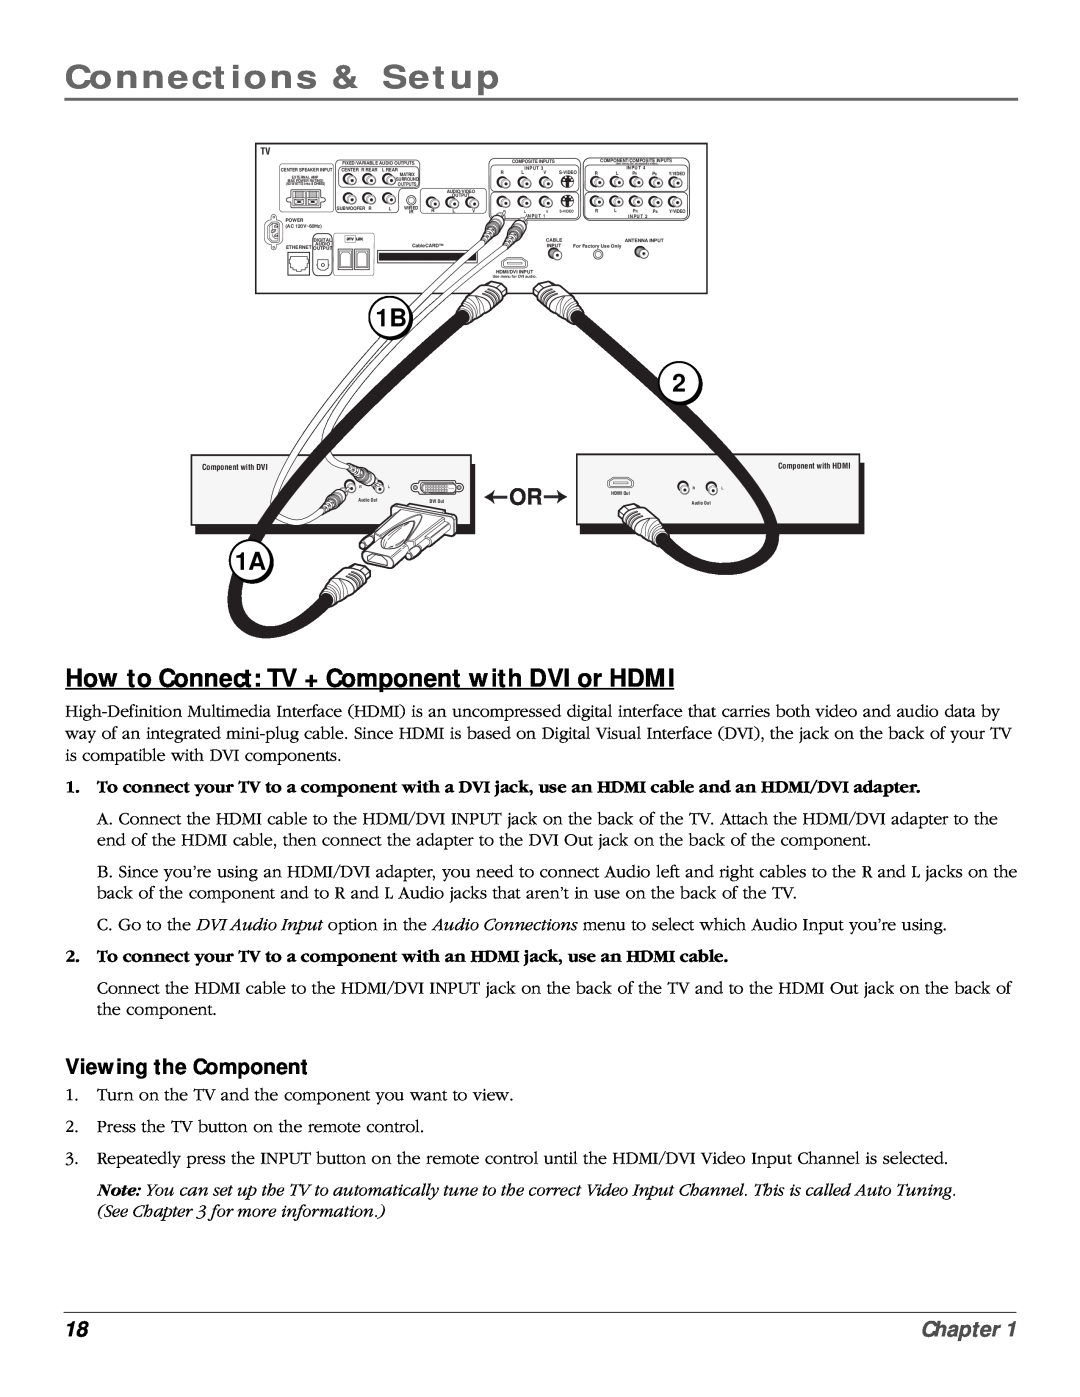 RCA scenium manual How to Connect TV + Component with DVI or HDMI, Viewing the Component, Connections & Setup, Chapter 